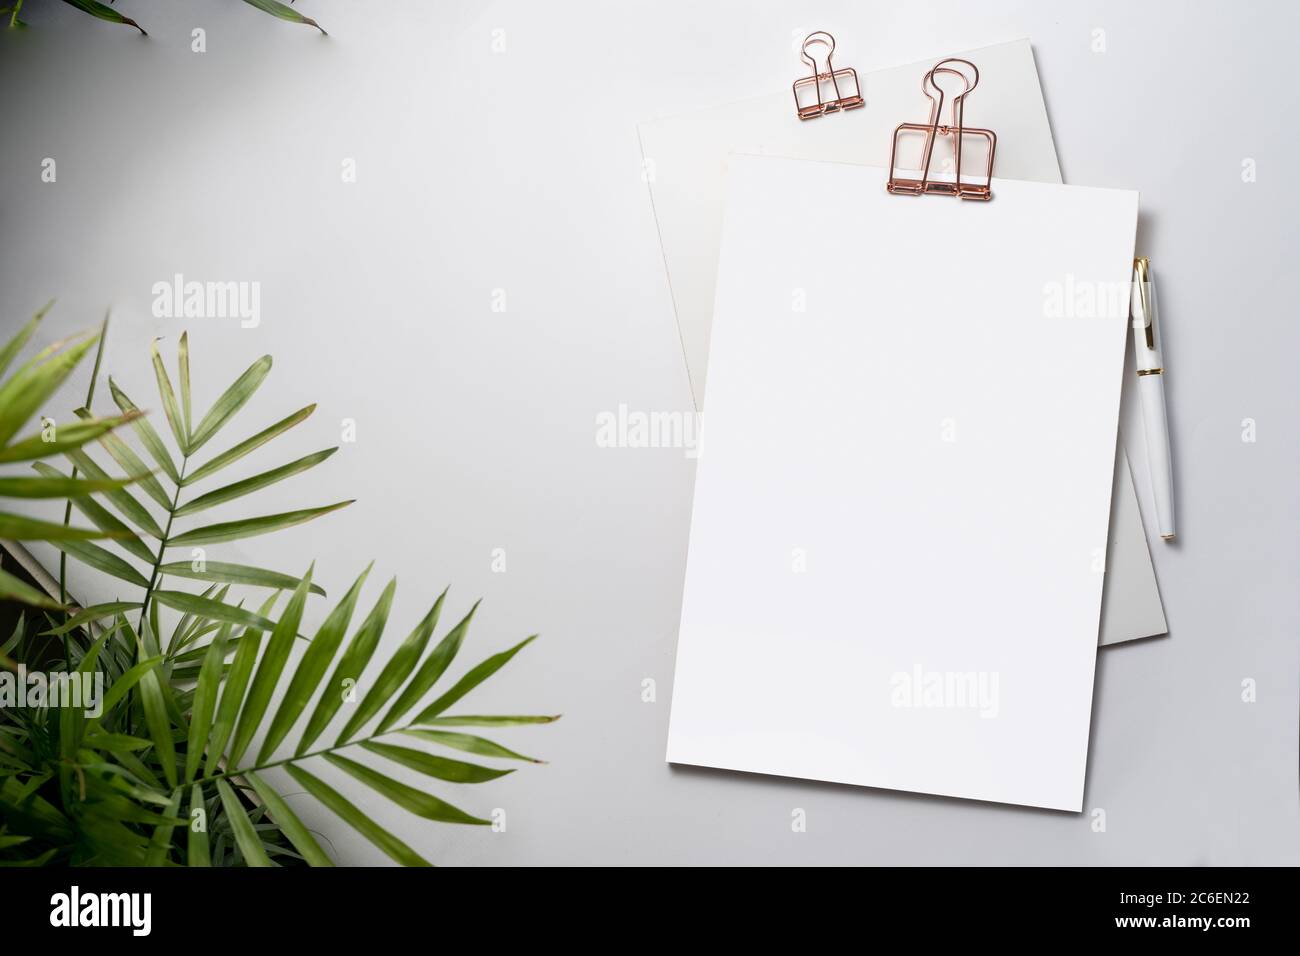 Blank corporate identity stationery set, personal branding mockup template. Sheets of paper, fountain pen and office supplies, decorated with a living Stock Photo